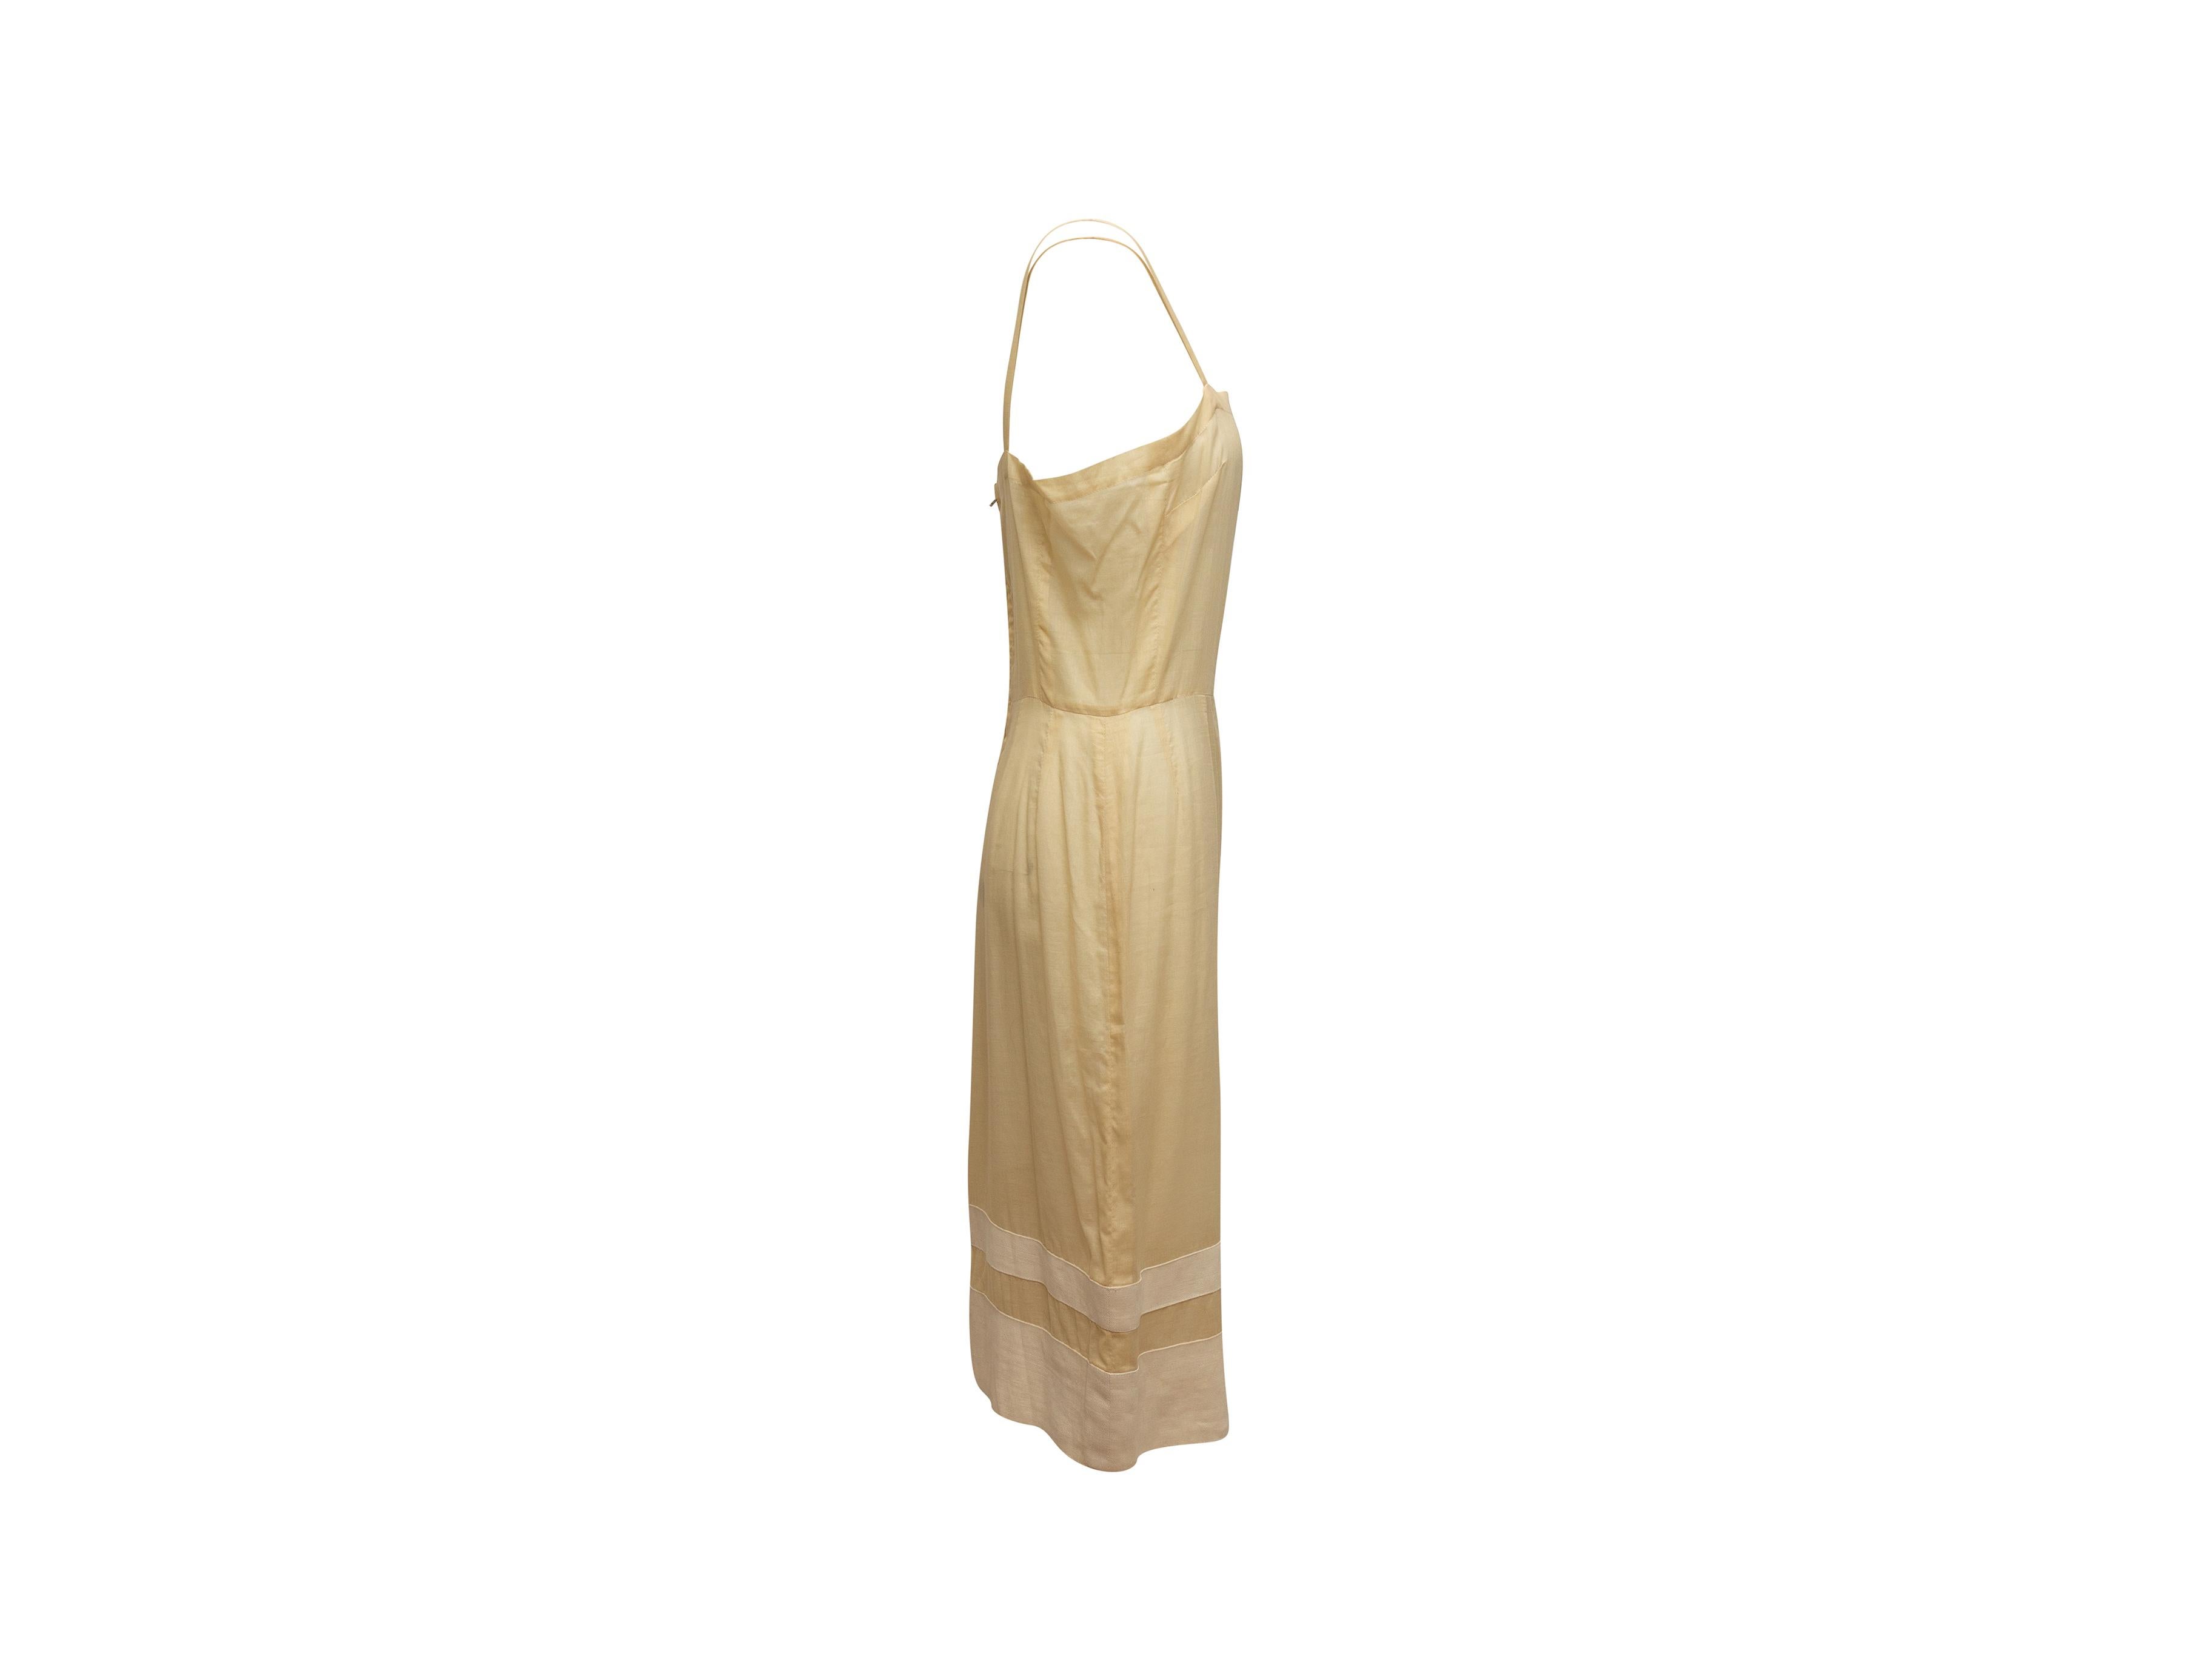 Product details: Vintage cream sleeveless dress by Chanel Boutique. Square neckline. Narrow straps. Zip closure at back. 36